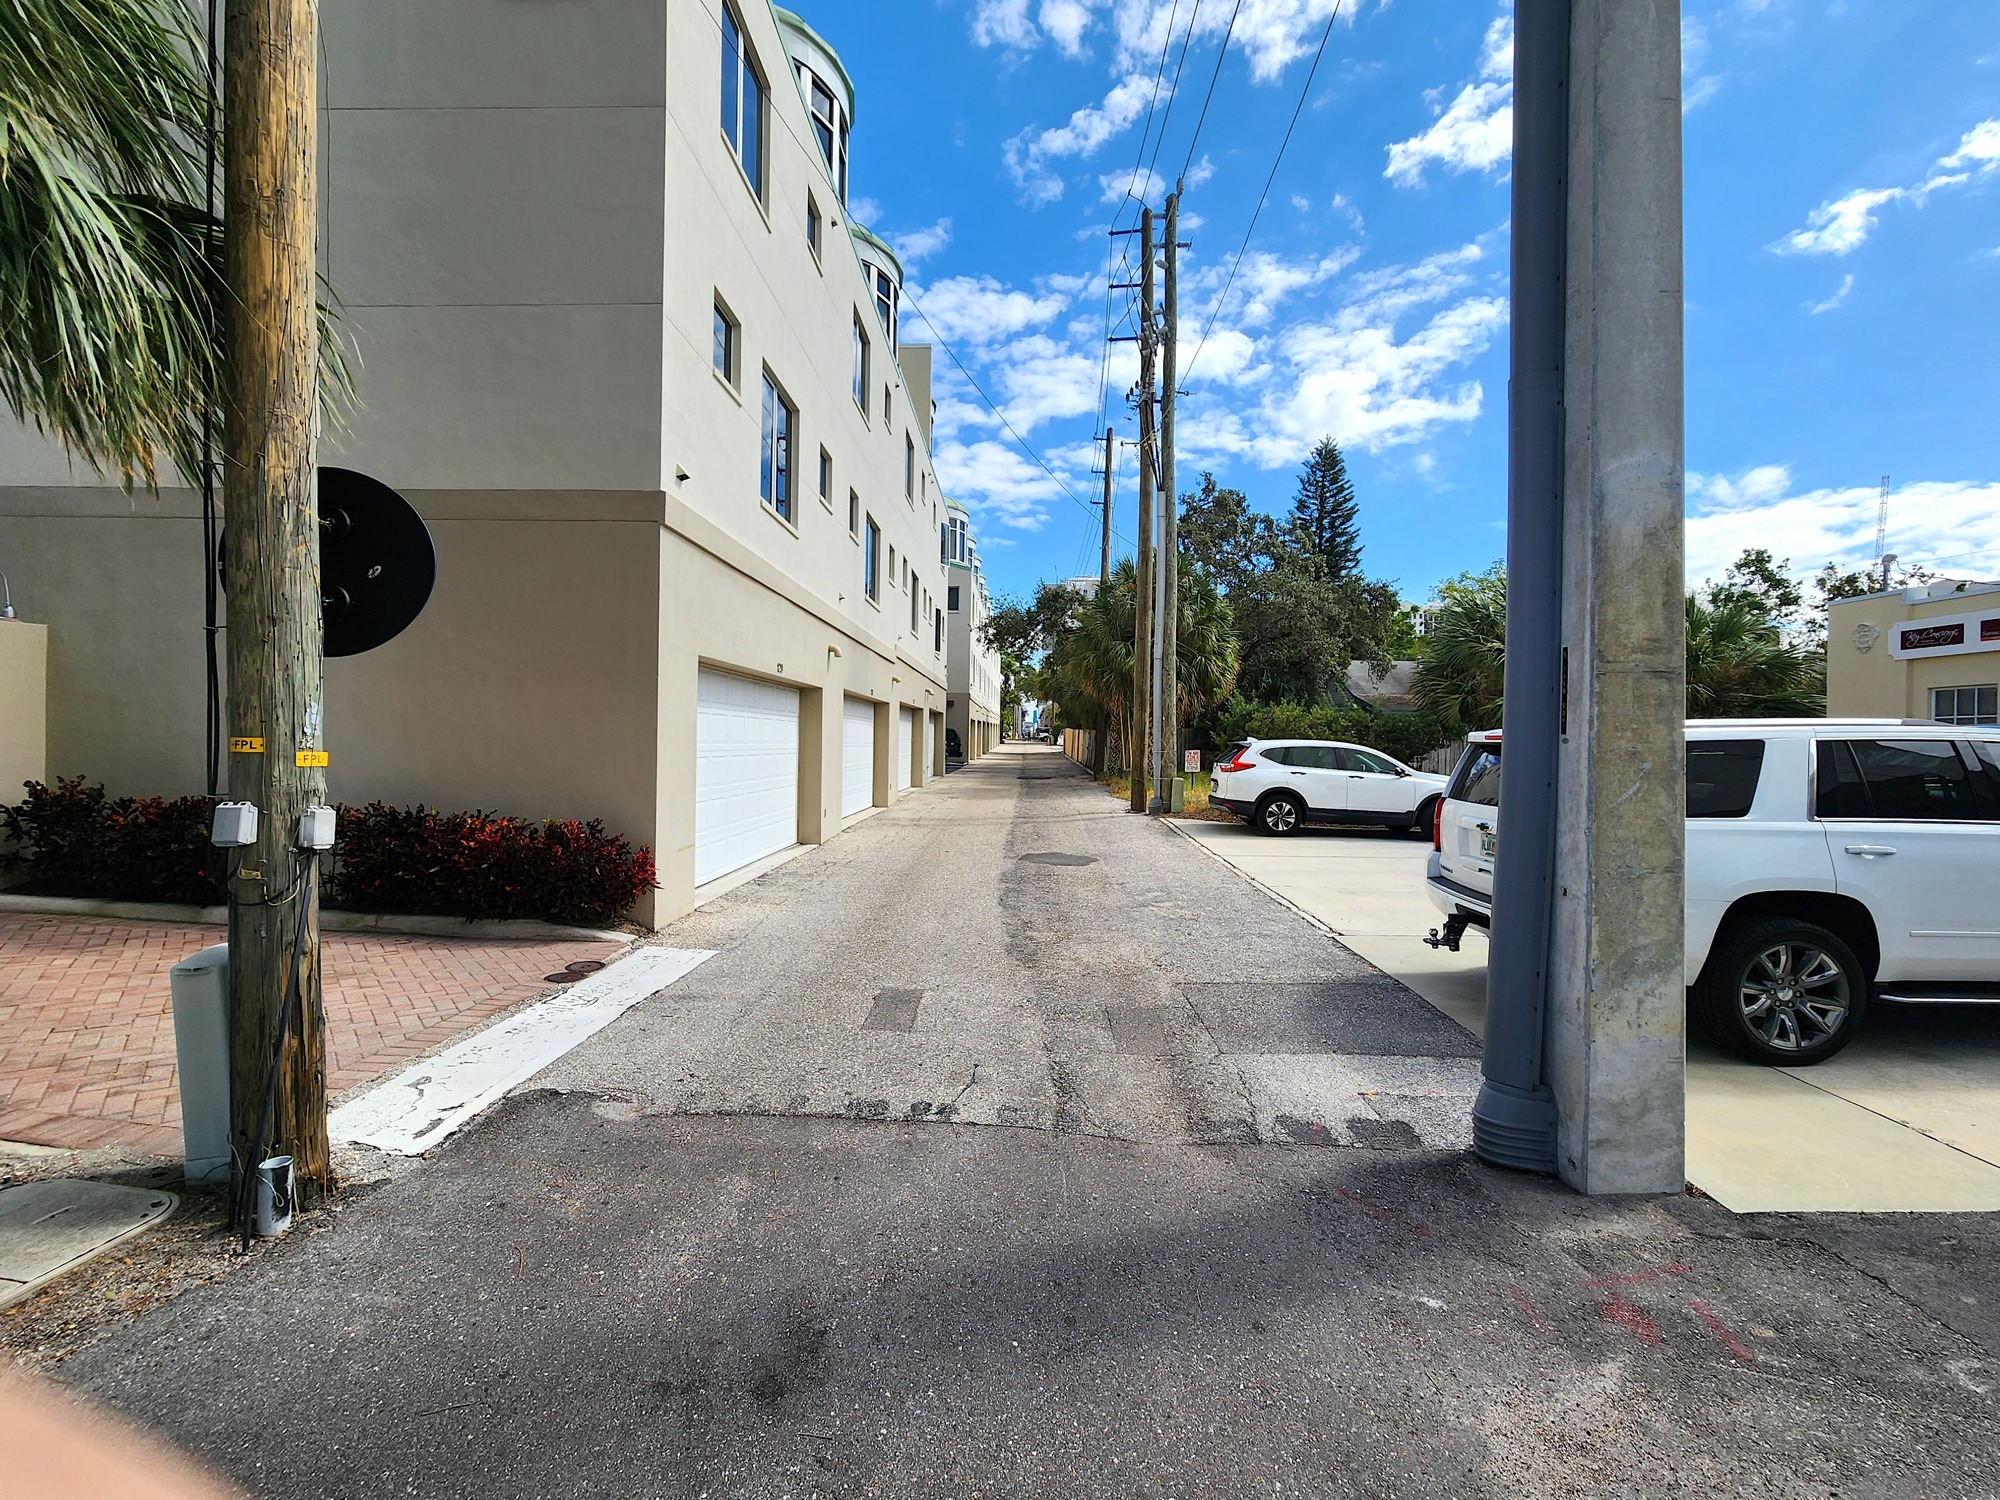 This alley between townhomes along Fruitville Road and Second Street is currently used for garage access for the townhomes, parking for Second Street businesses and service vehicles for the Embassy Suites. (Andrew Warfield)